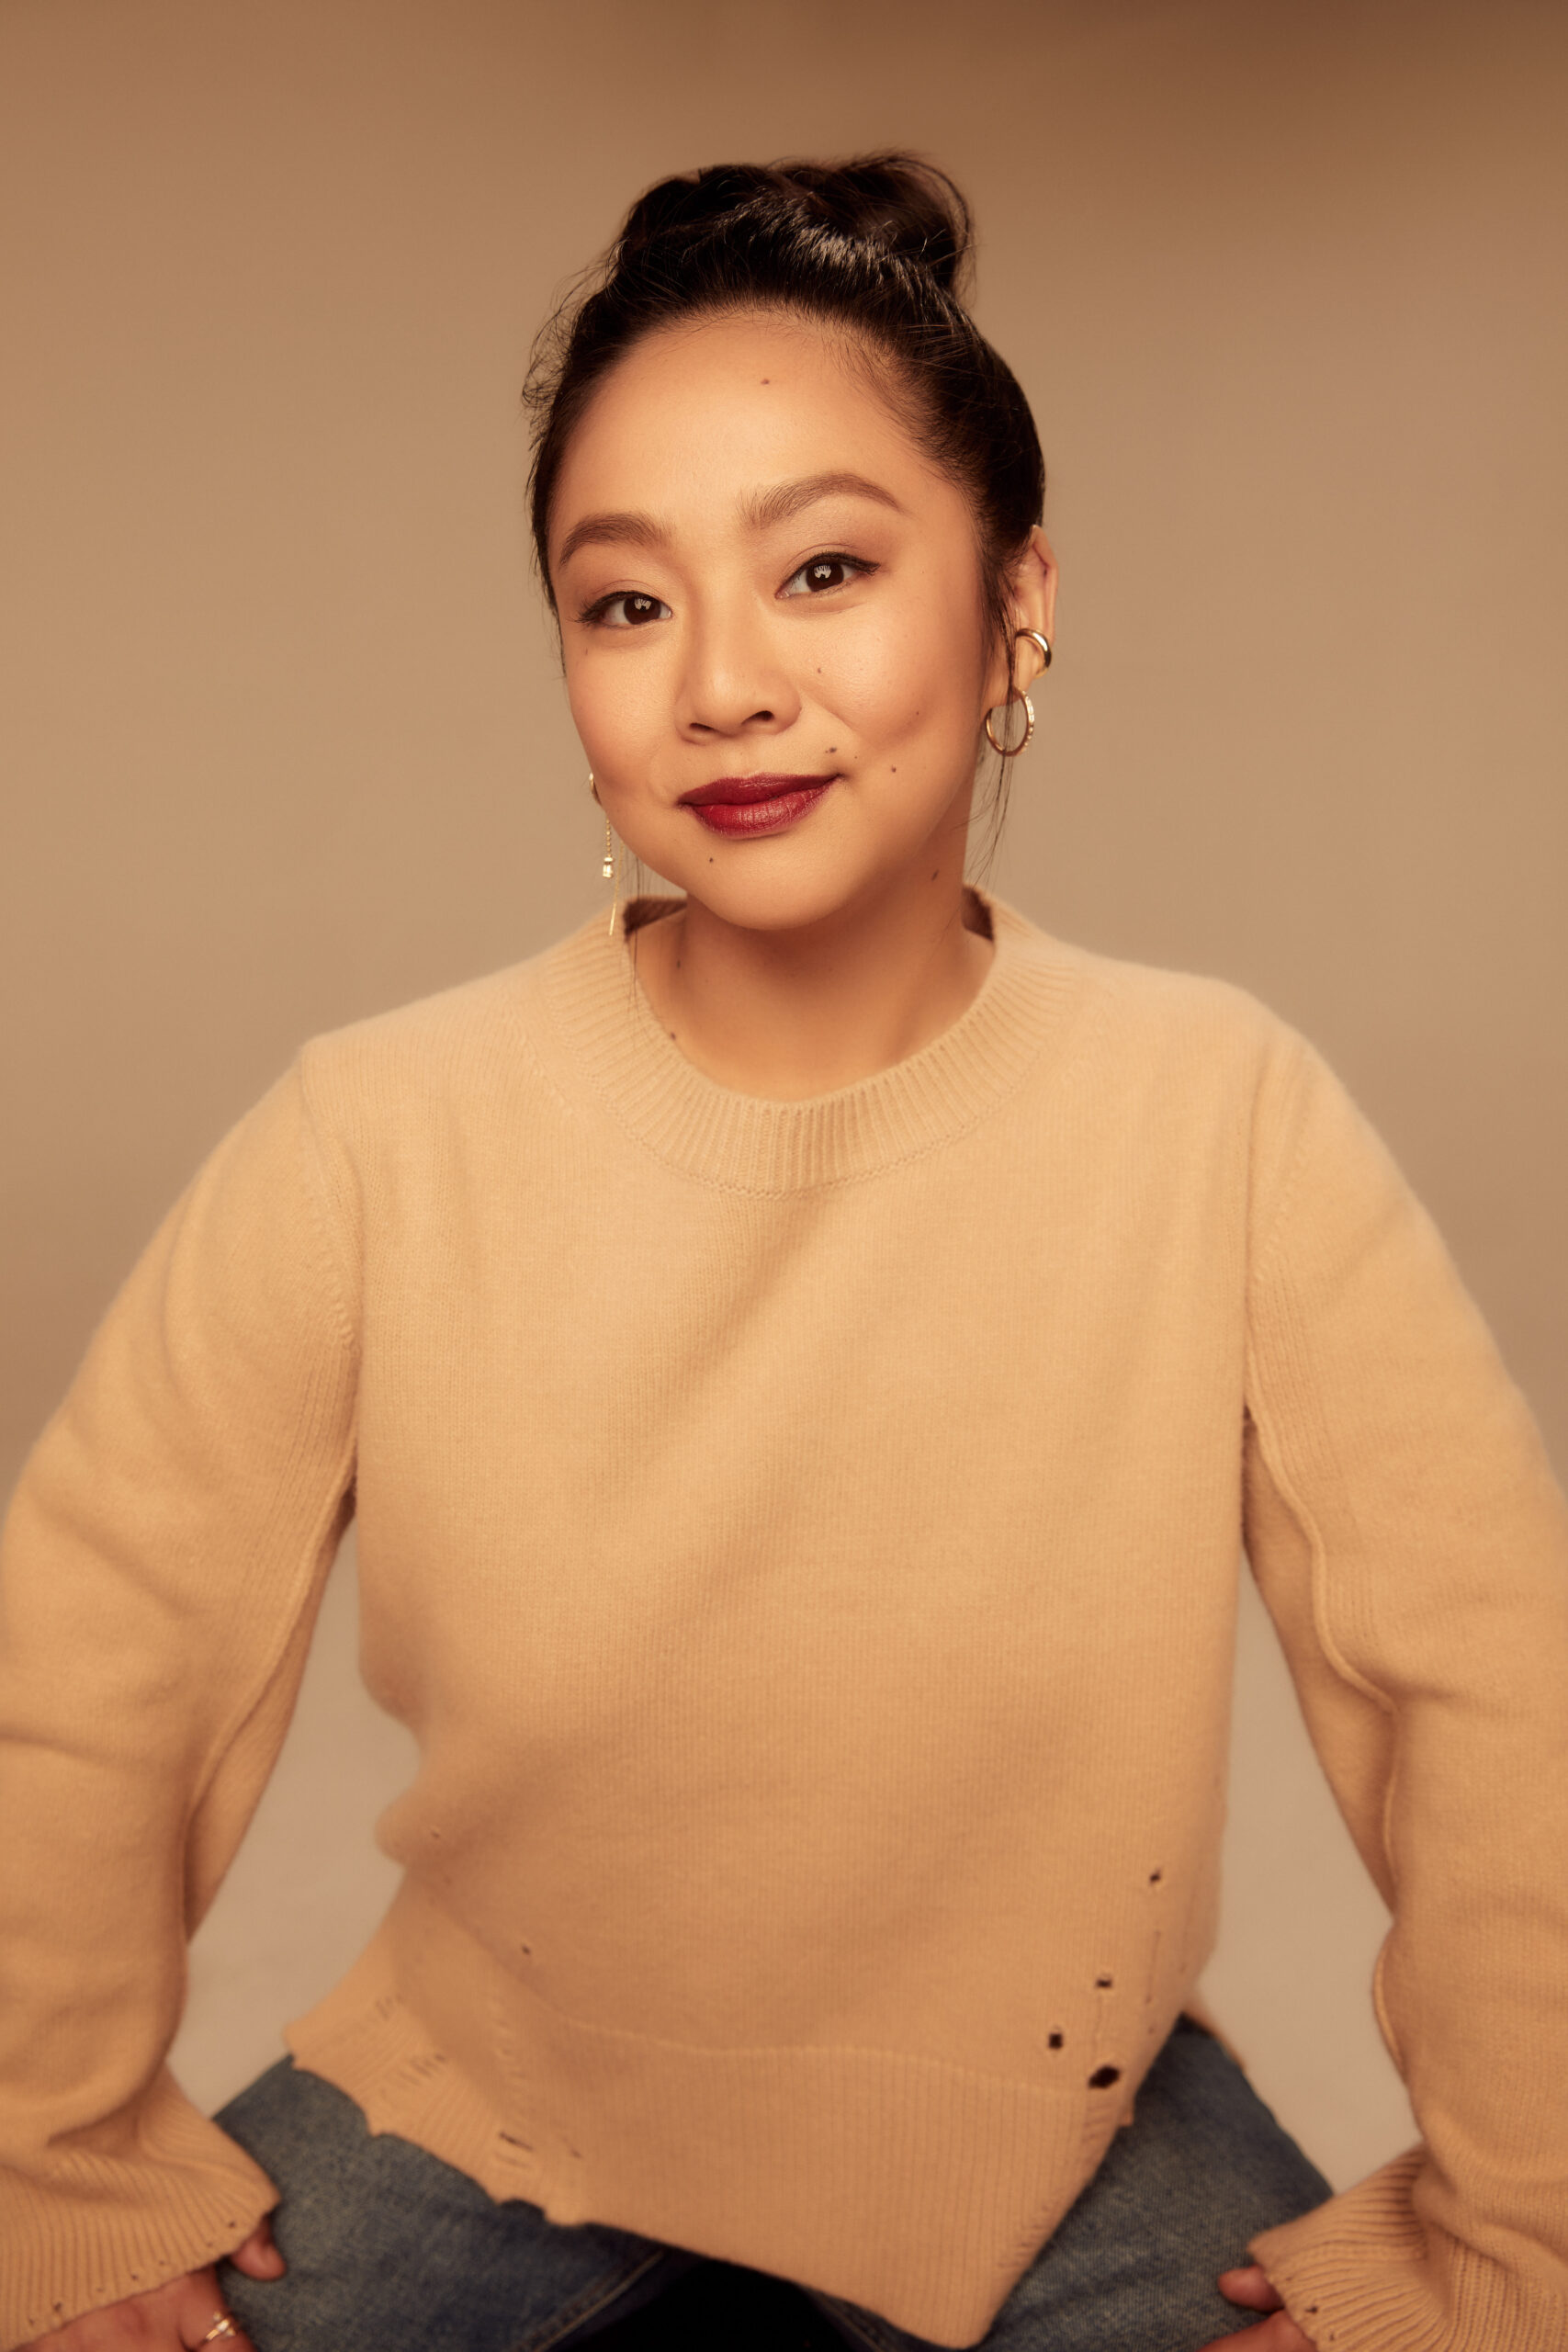 Actress Stephanie Hsu, star of the film “Everything Everywhere All At Once,” will be awarded with HIFF's 2022 Breakthrough Artist Award. JONNY MARLOW